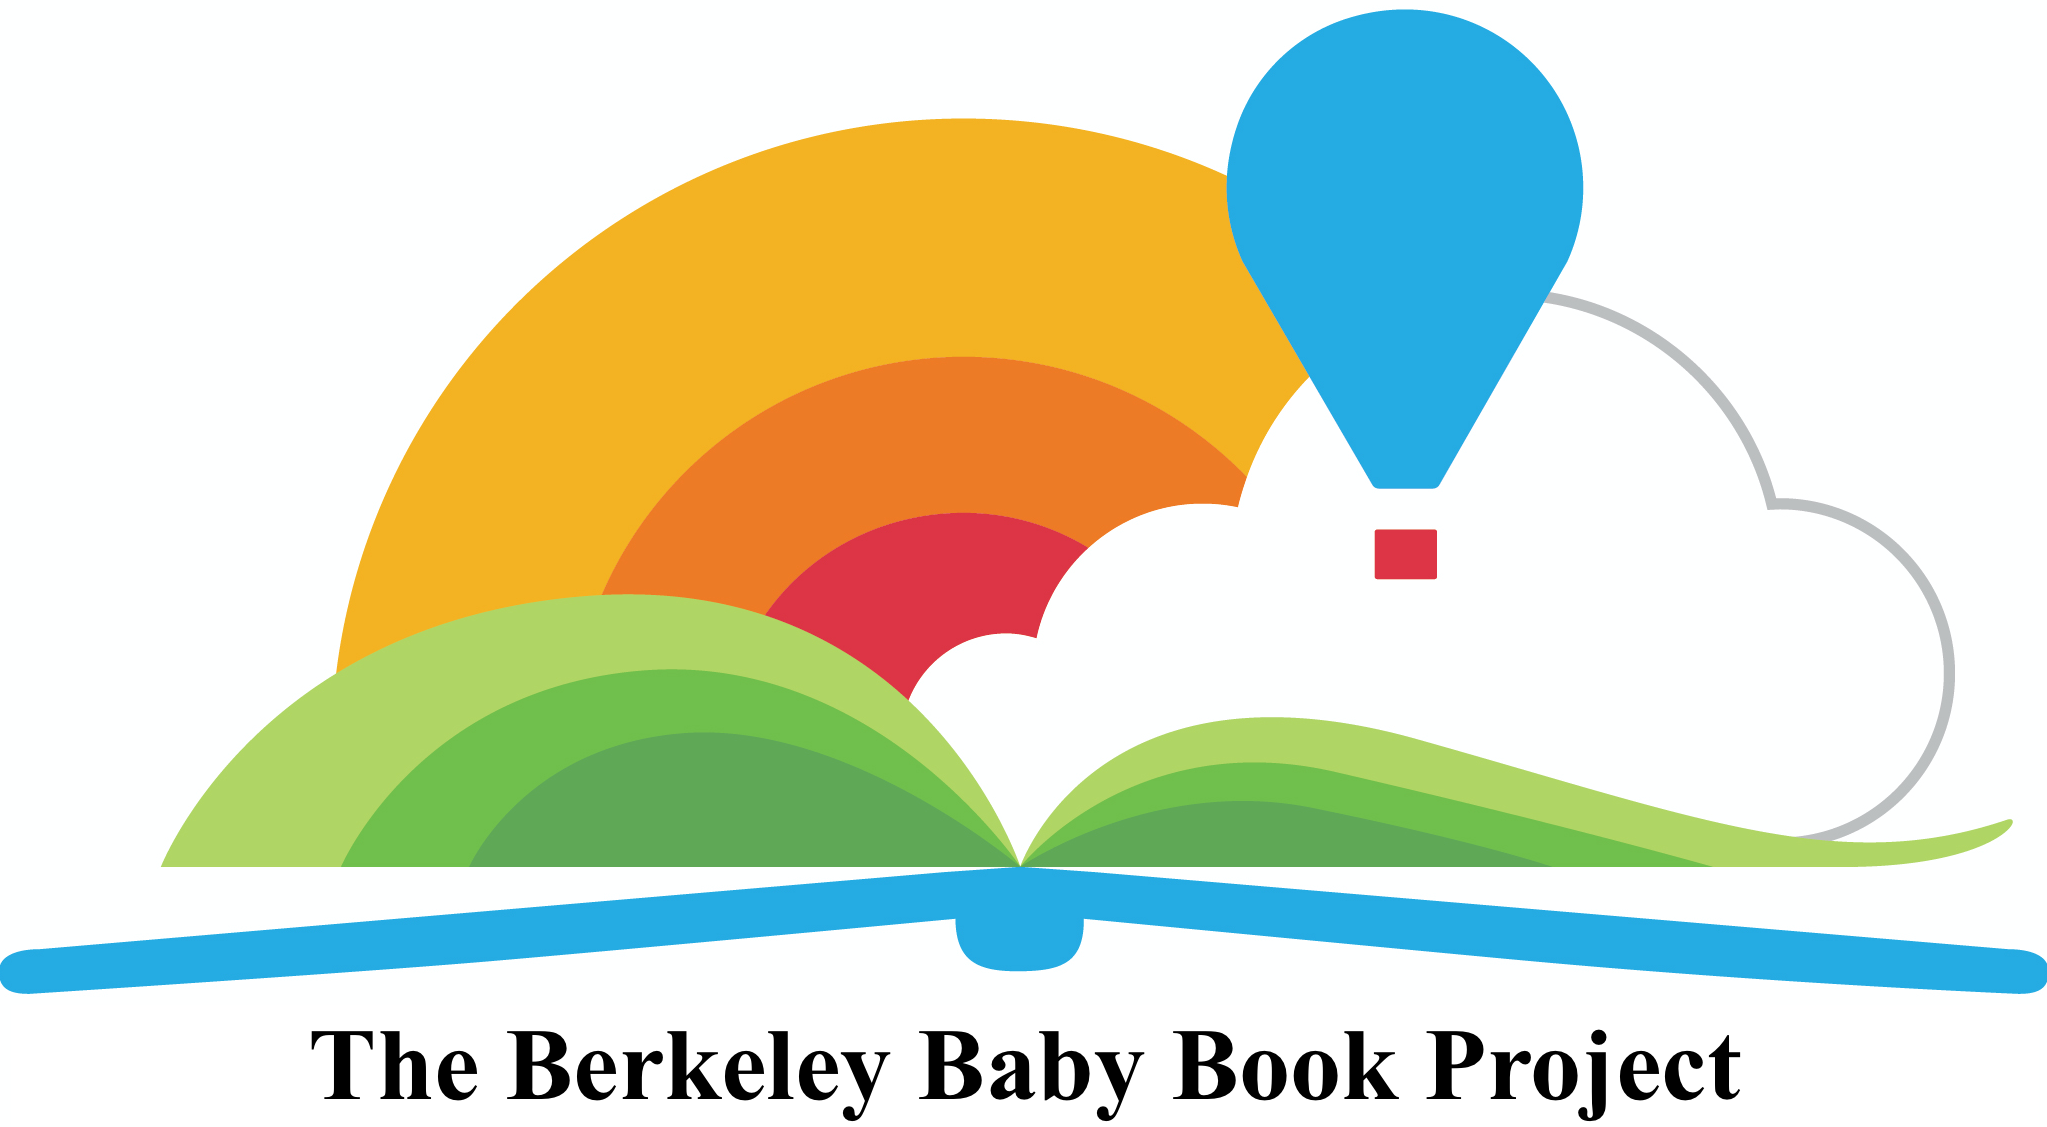 The Berkeley Baby Book Project